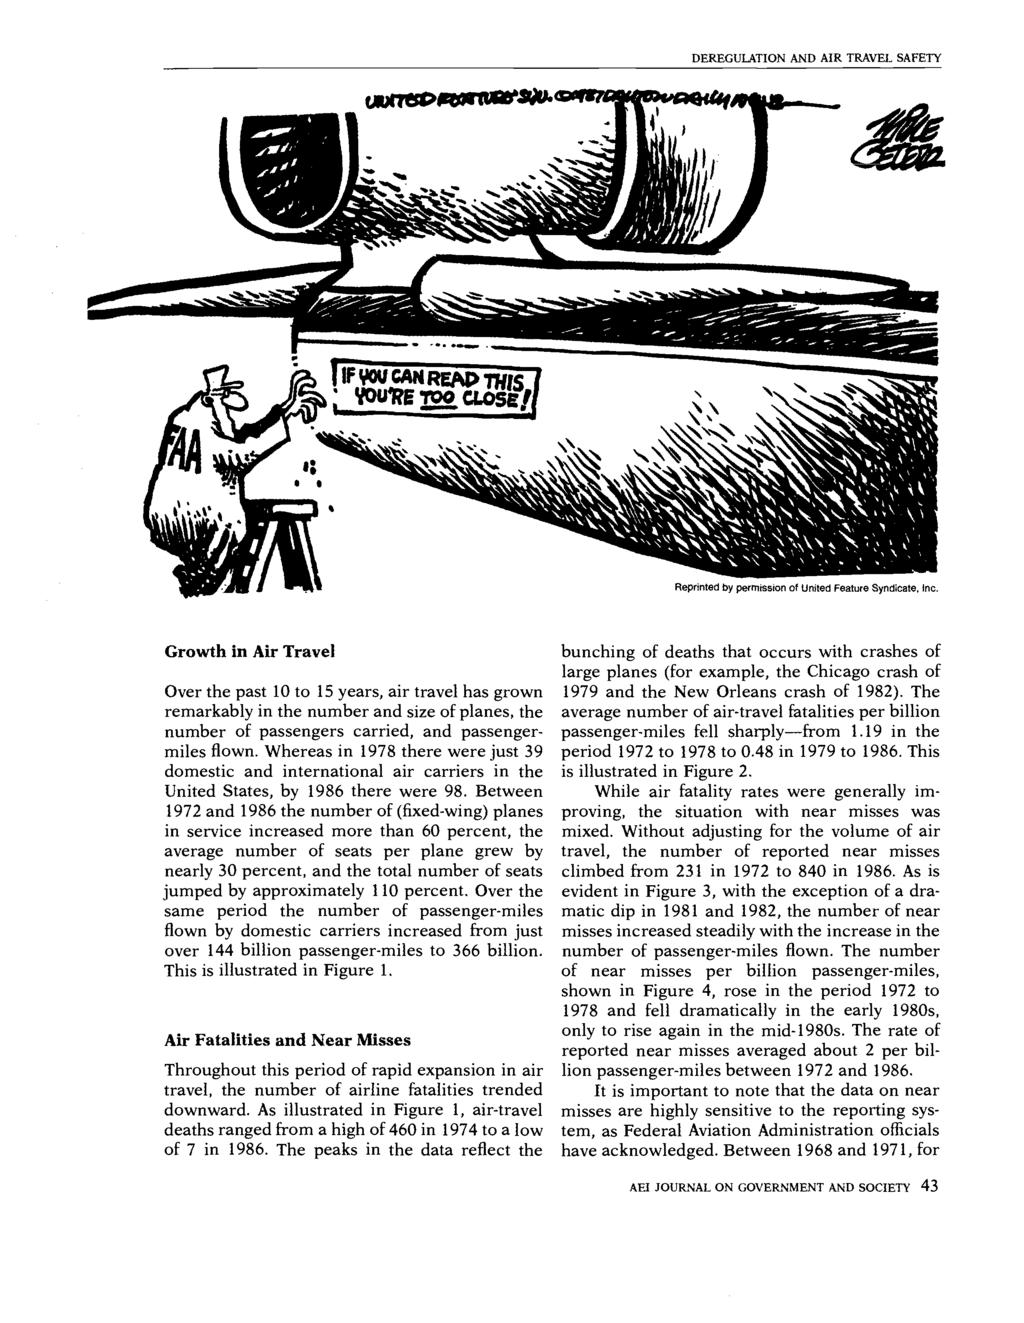 DEREGULATION AND AIR TRAVEL SAFETY Reprinted by permission of United Feature Syndicate, Inc.